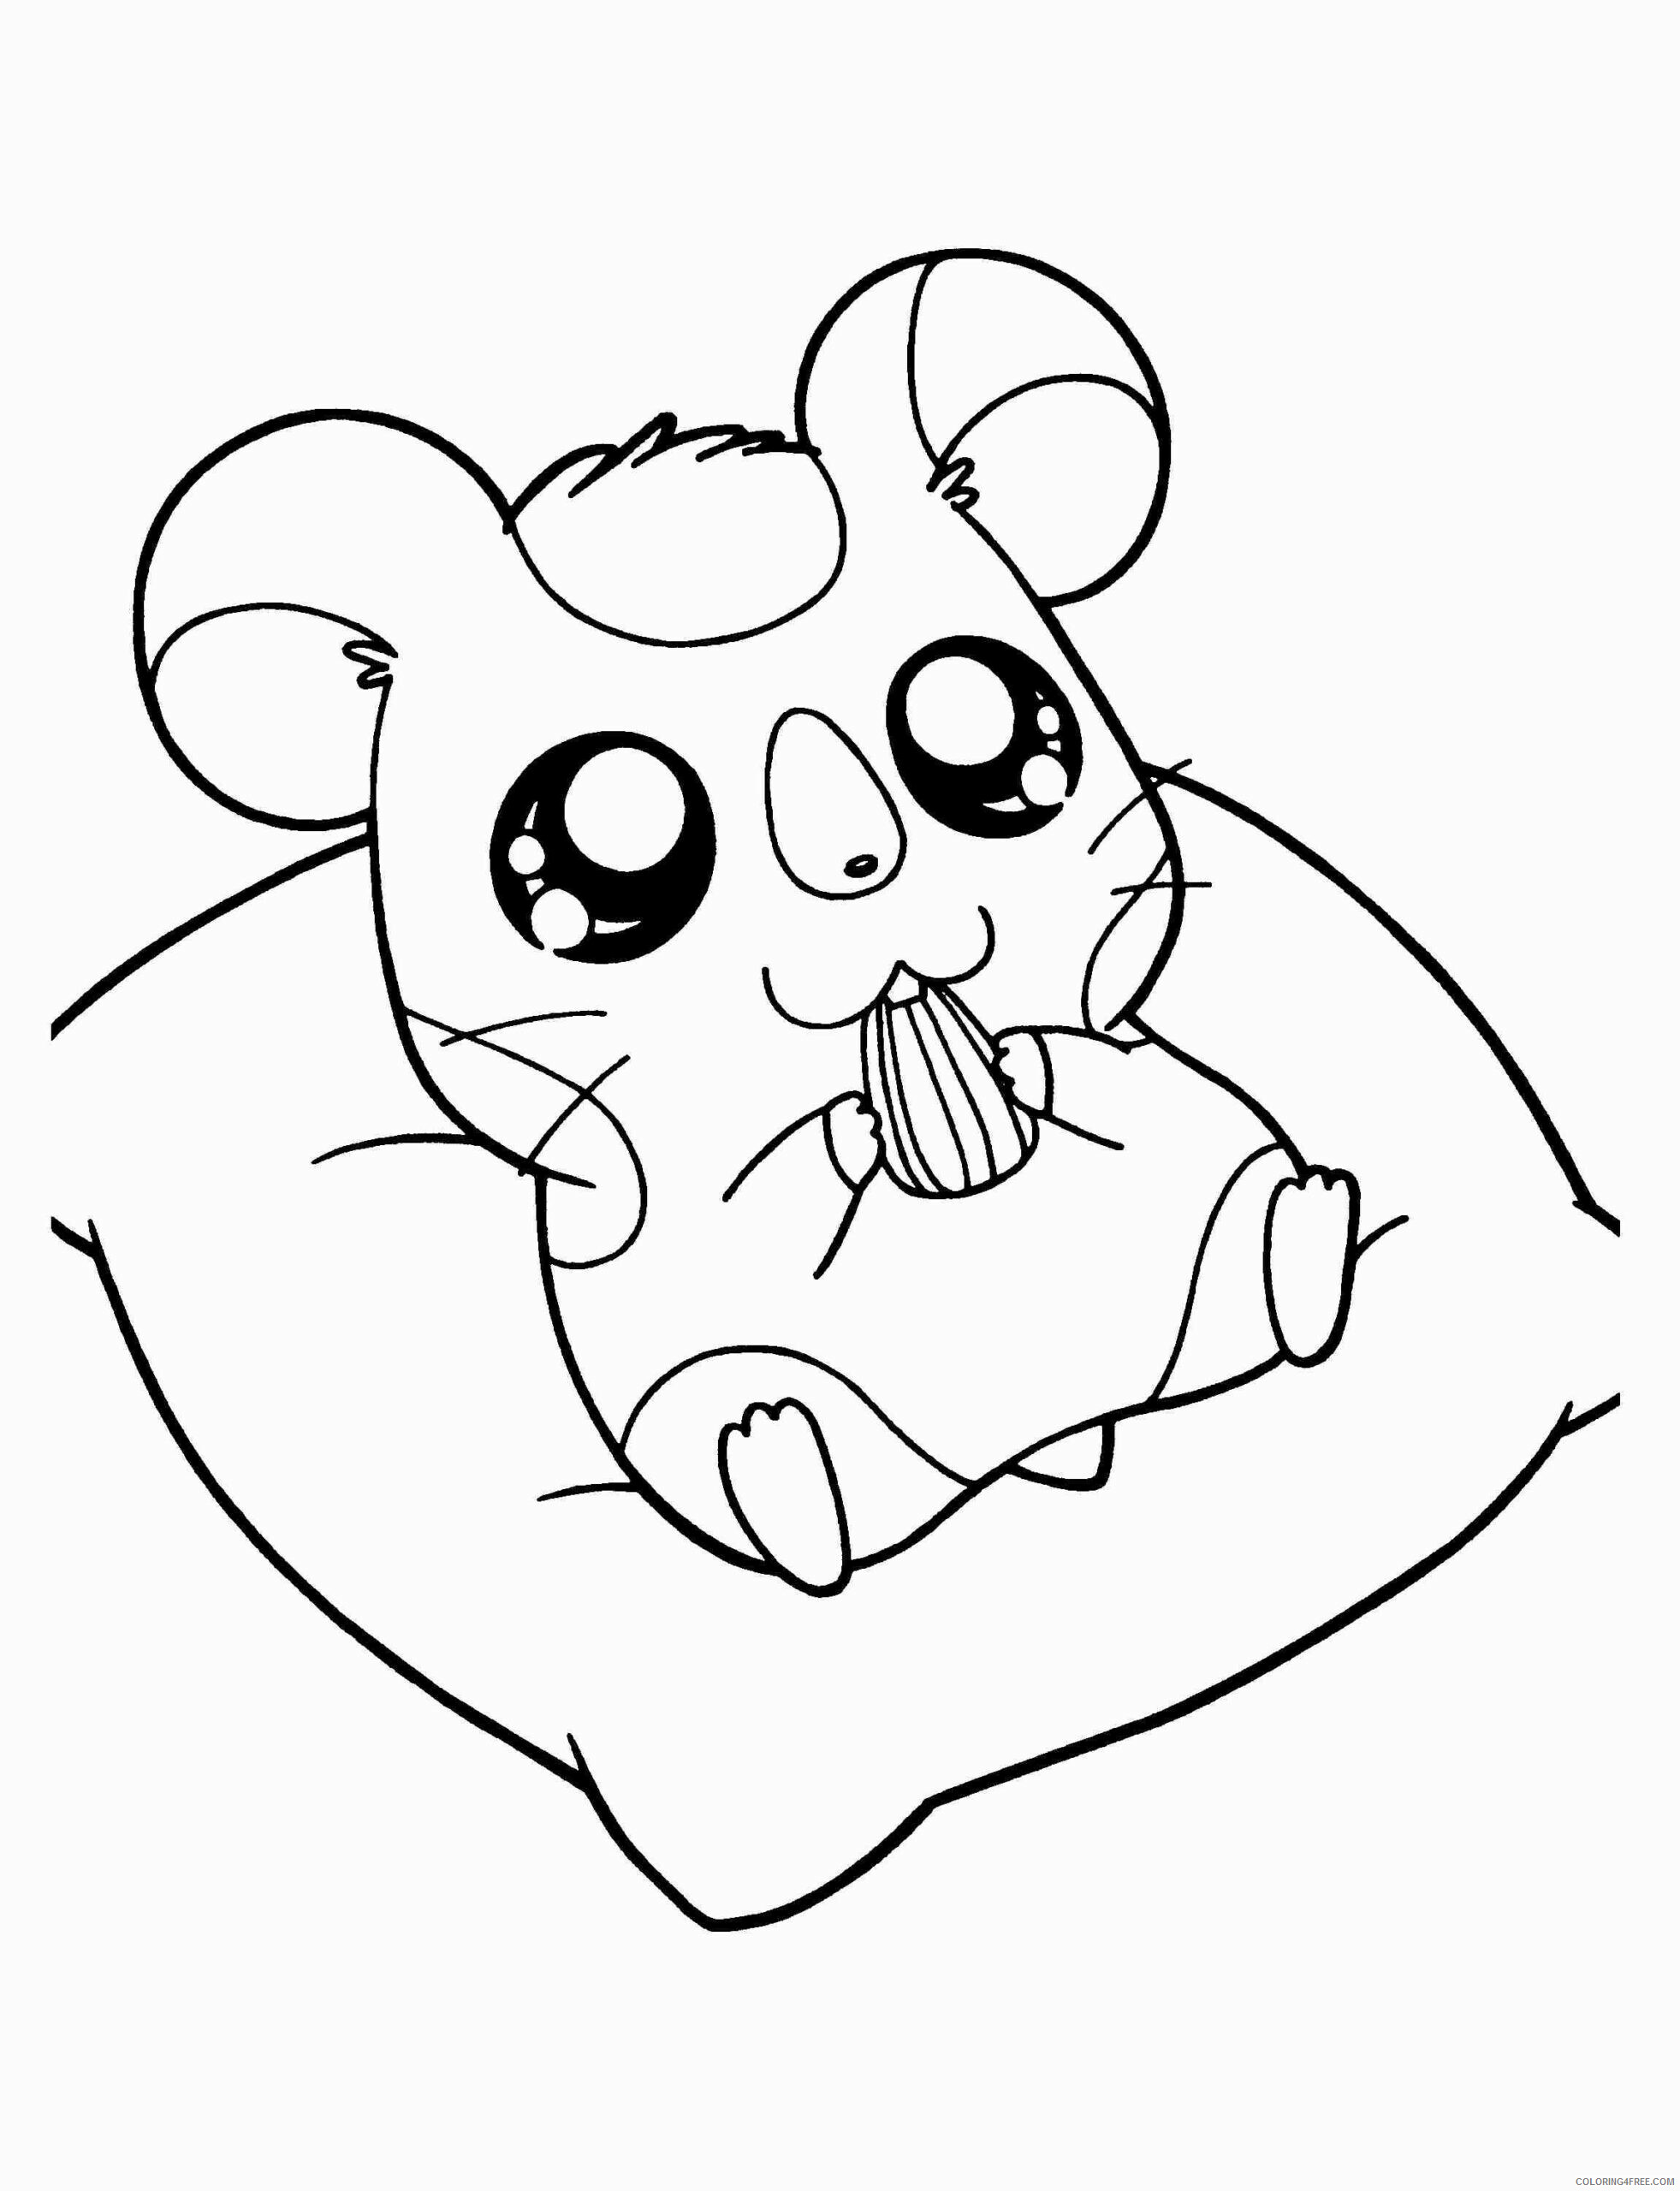 Hamster Coloring Pages Animal Printable Sheets Sweet Hamster 2021 2586 Coloring4free